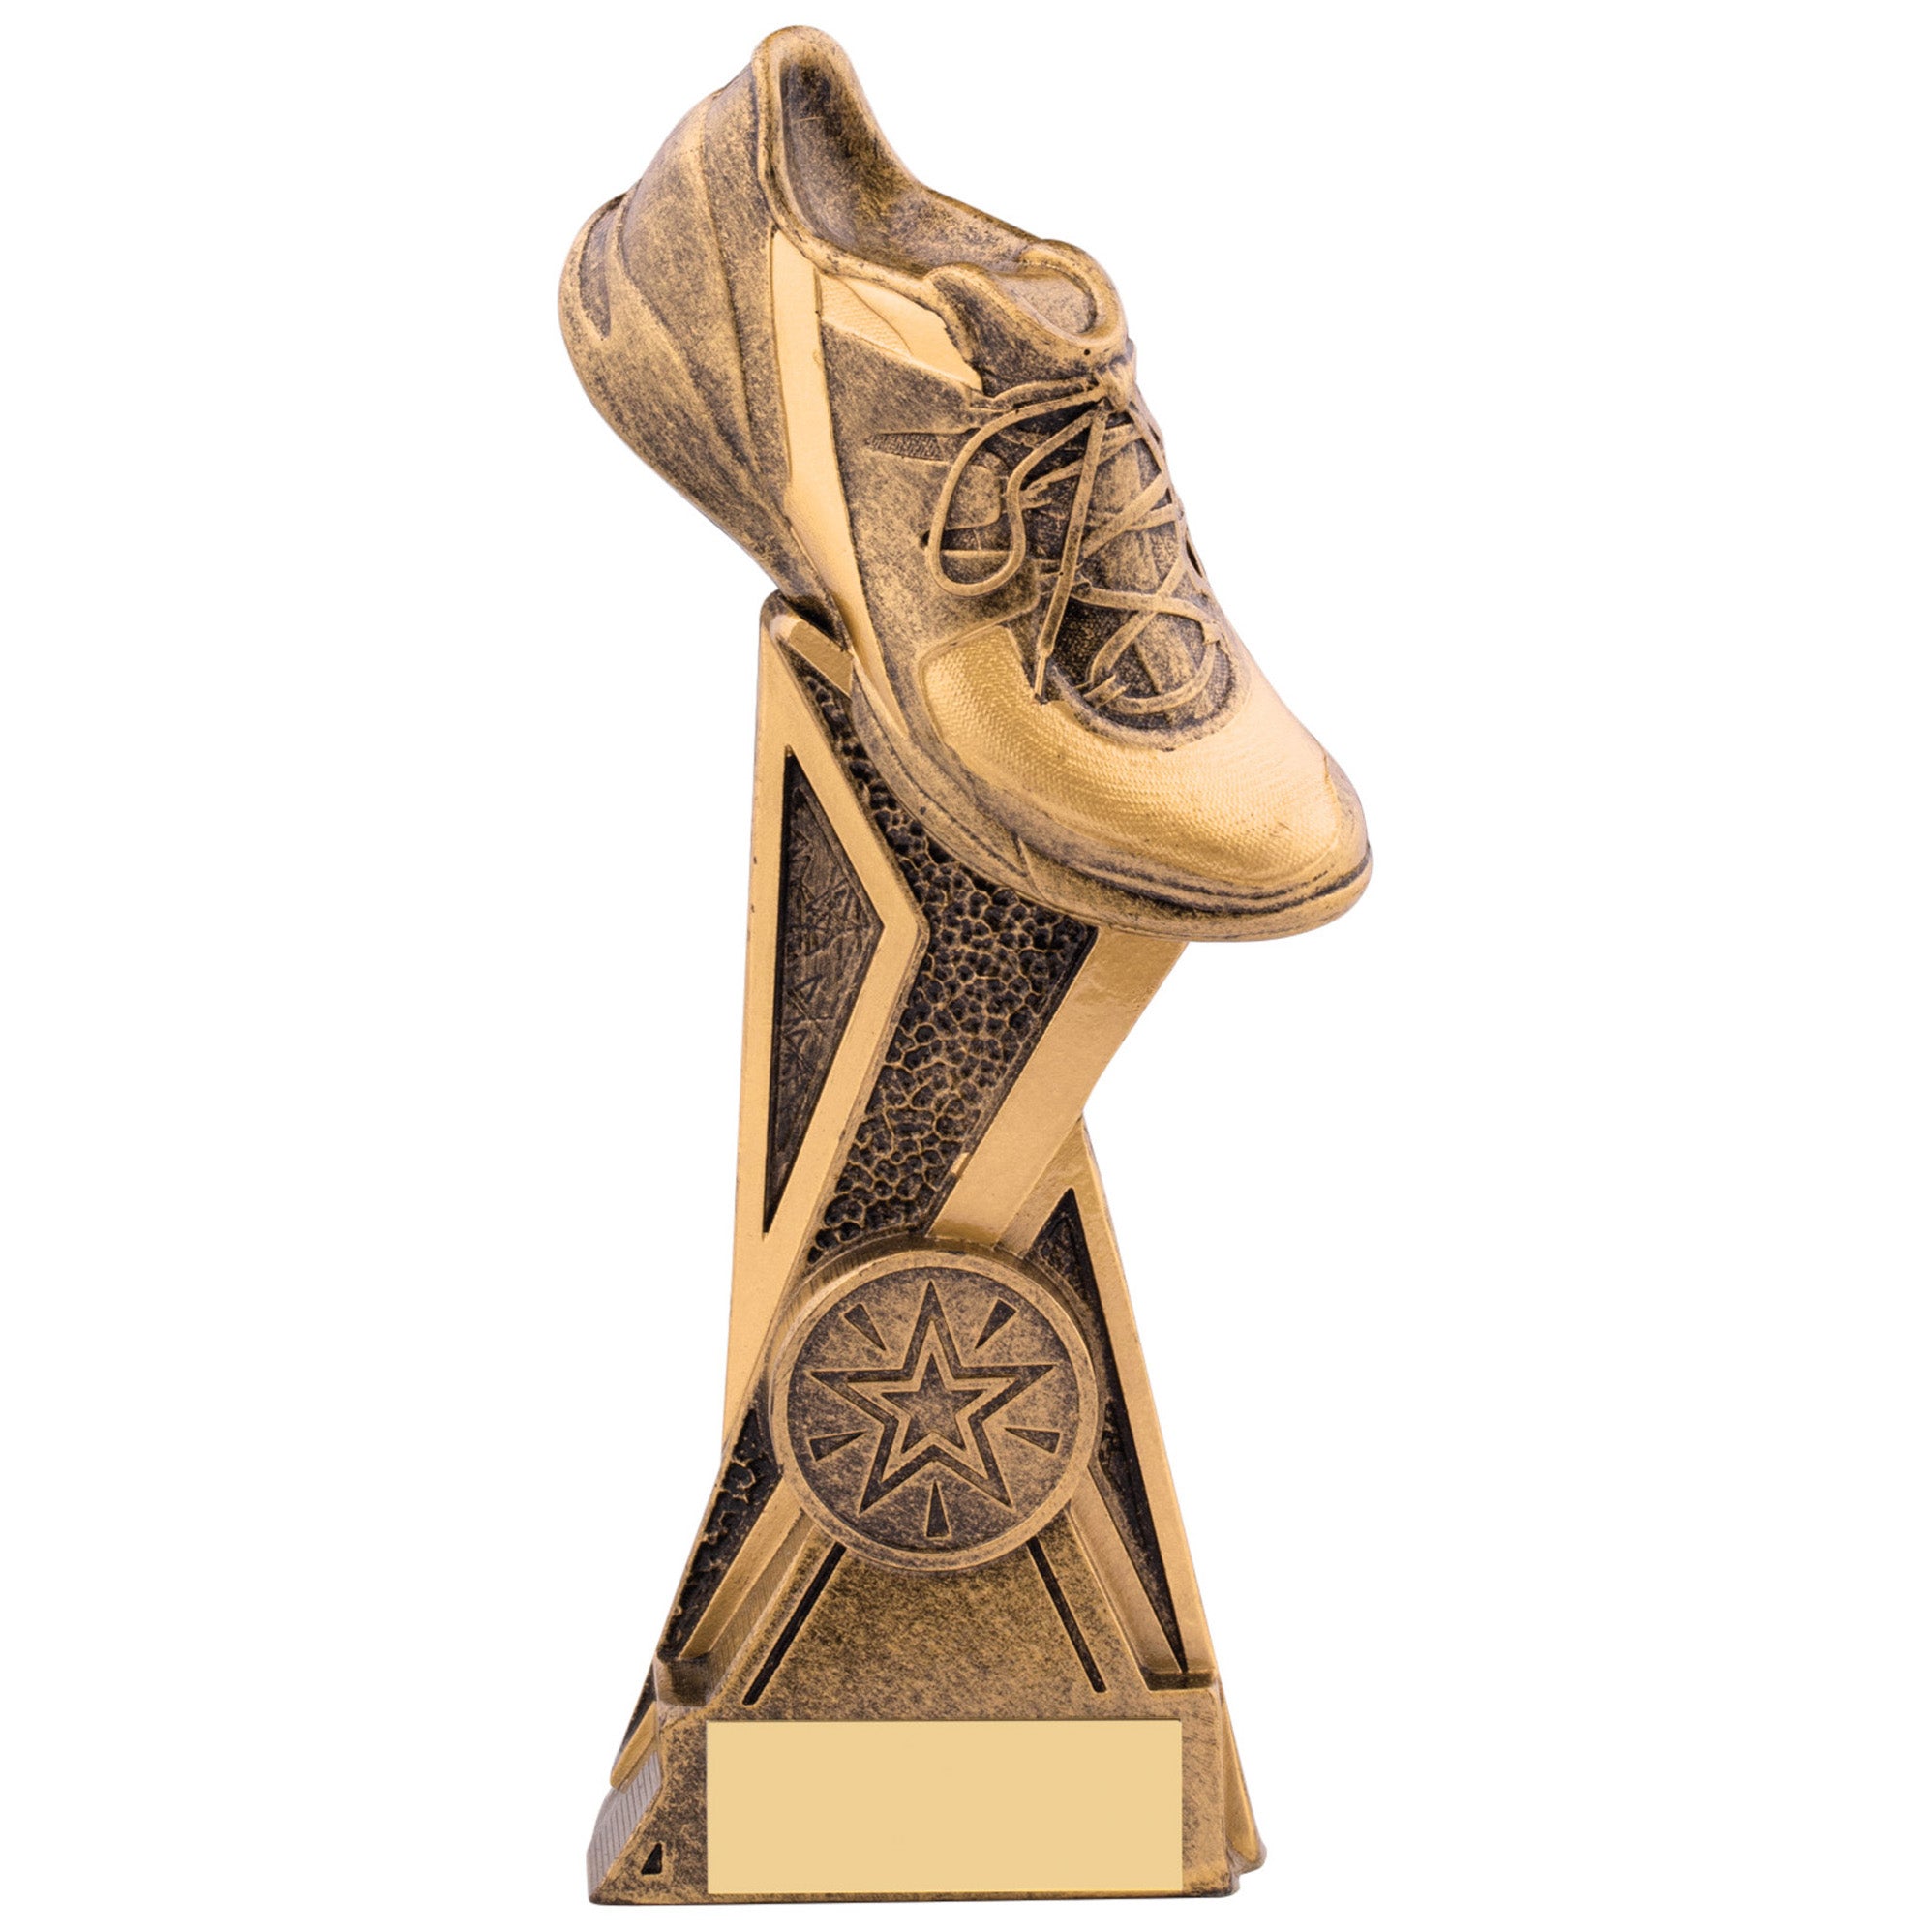 Running Shoe Storm Award - Available with Engraving and Custom 1" Centre